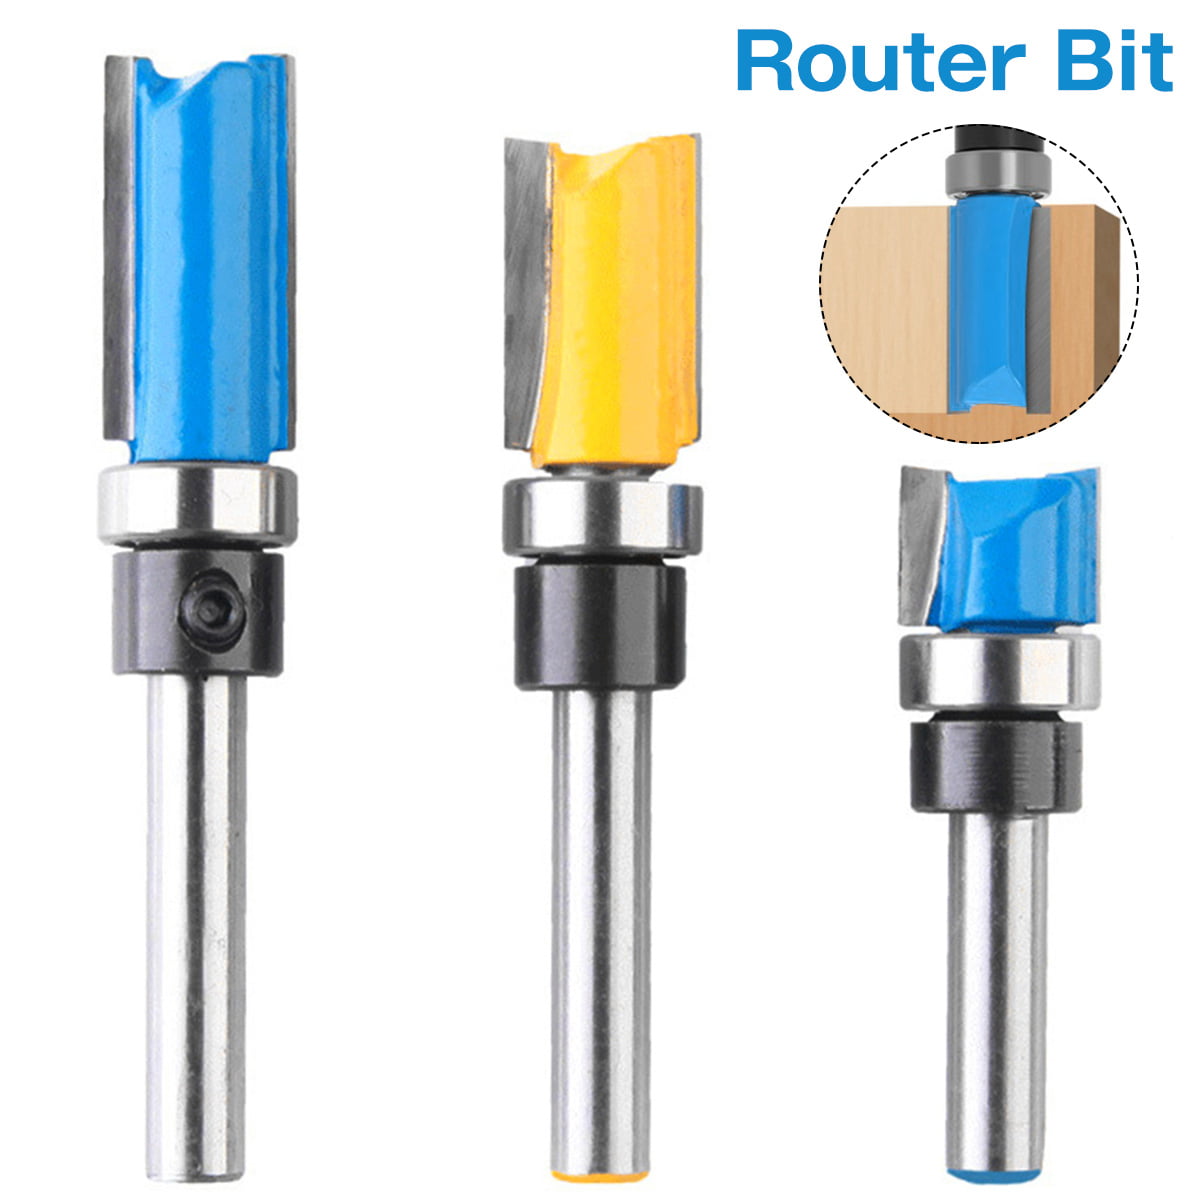 UK Router Bits 1/2" Shank Straight Cutter Sealed Bearing Woodwork For Chipboard 